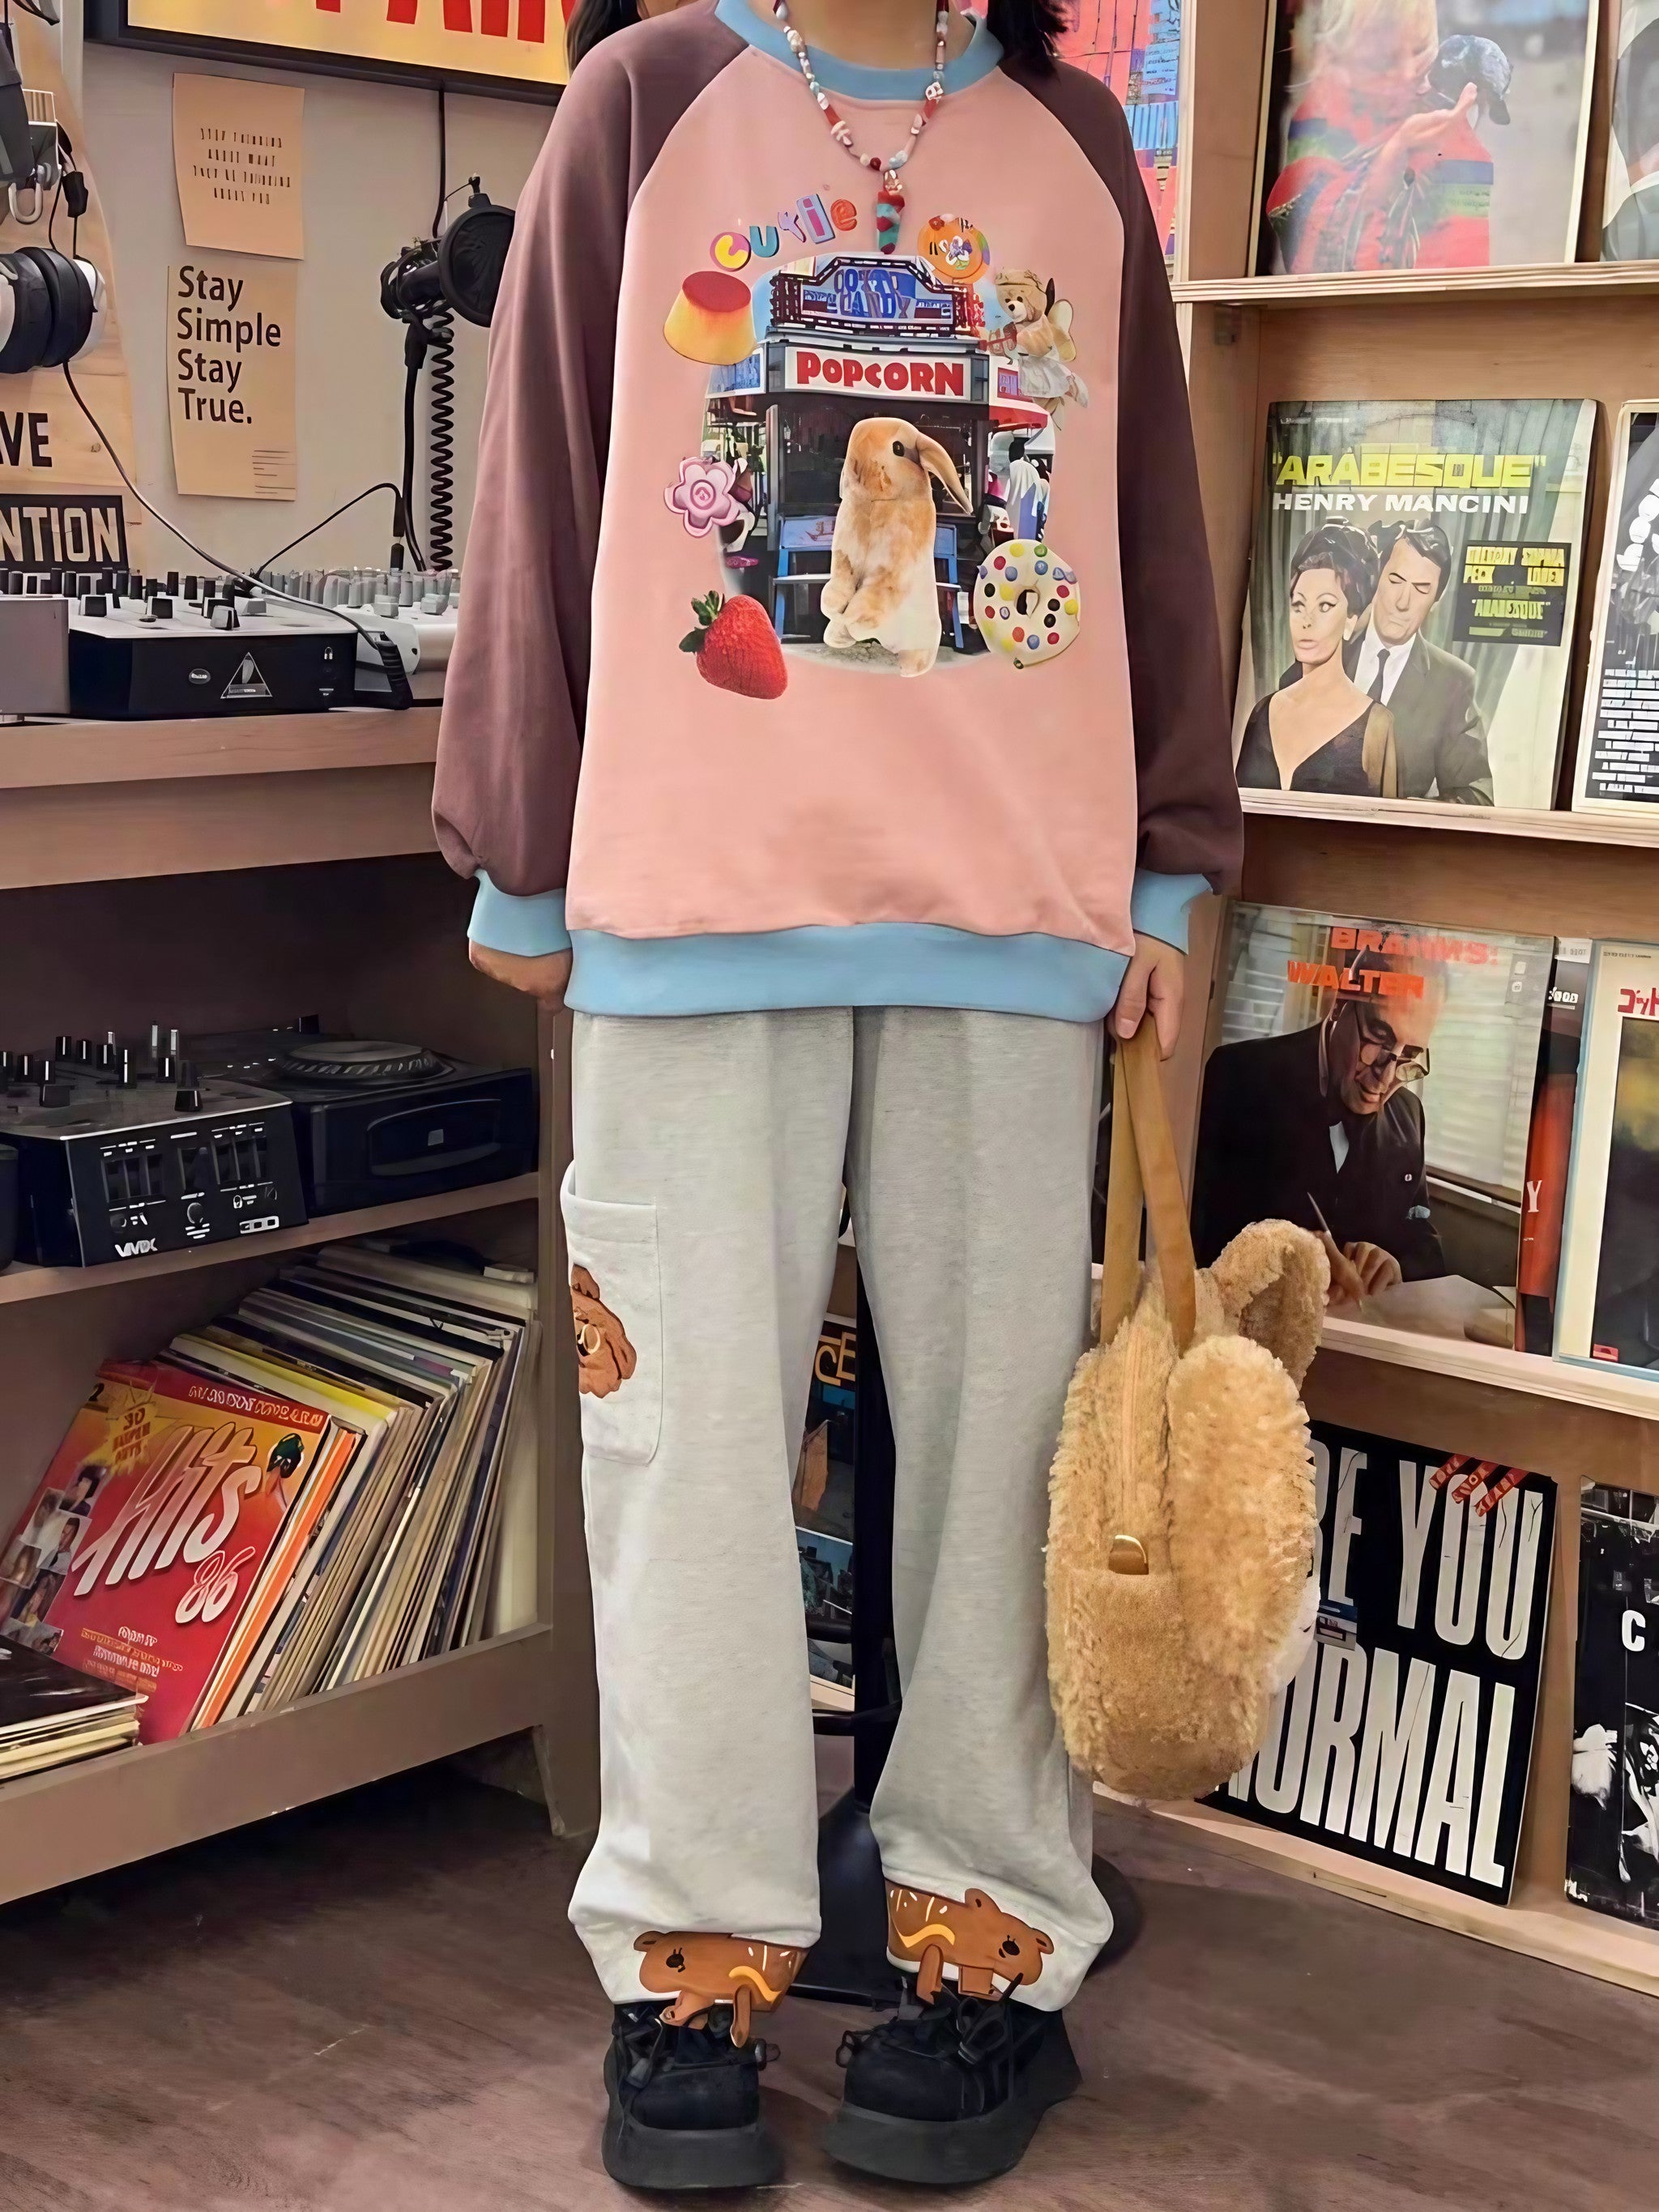 A stylish individual in a cartoon-themed sweatshirt paired with casual pants and holding a plush toy